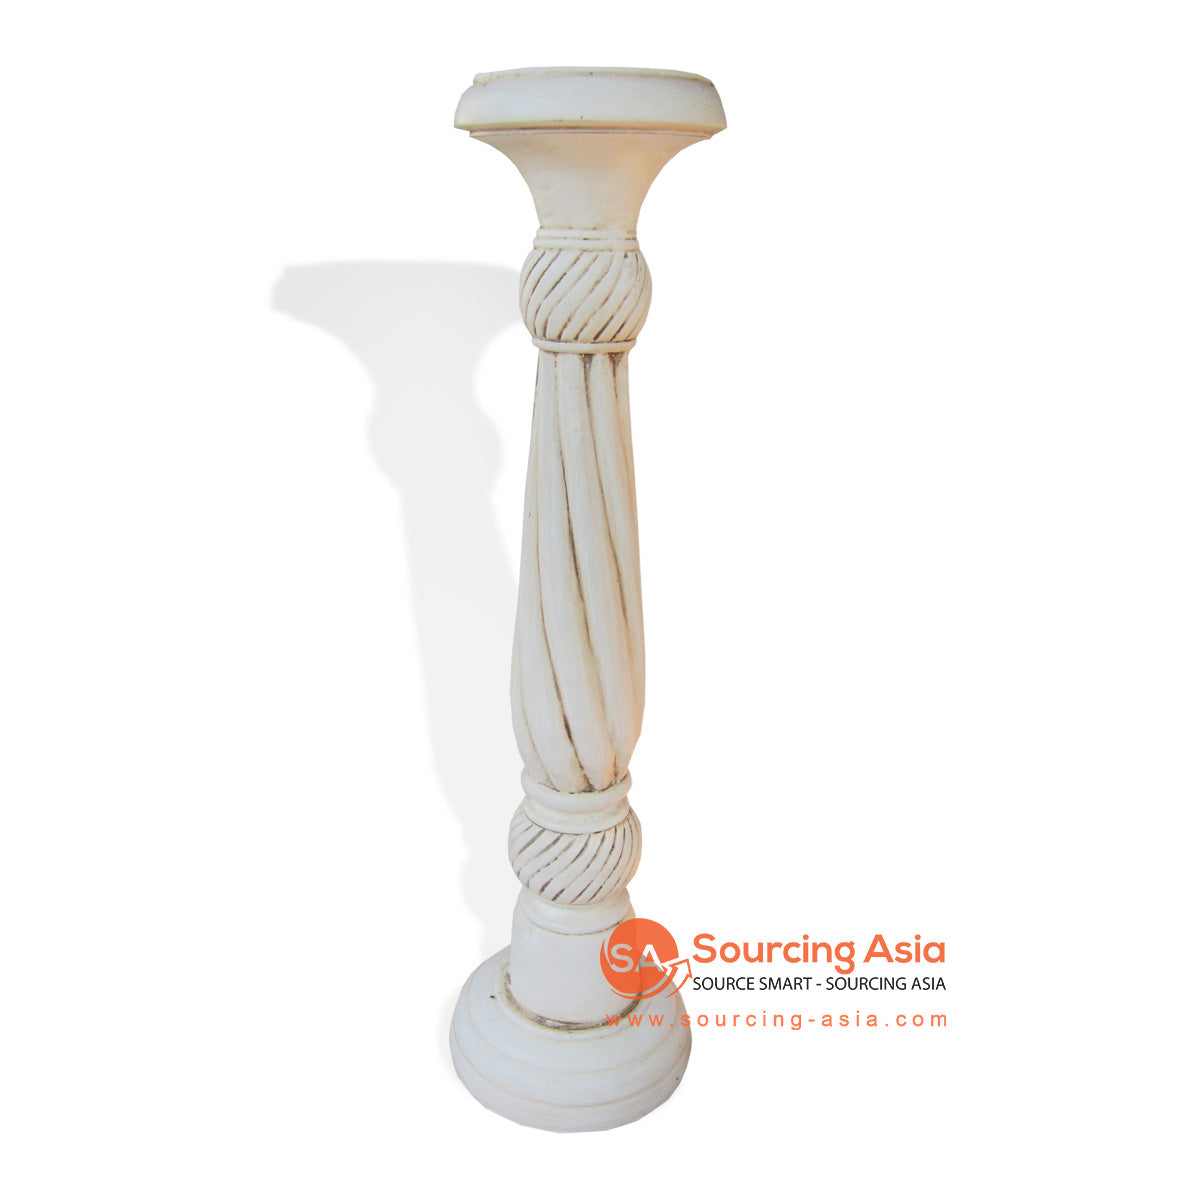 CHWD022-50 CREAM TWISTED CANDLE HOLDER